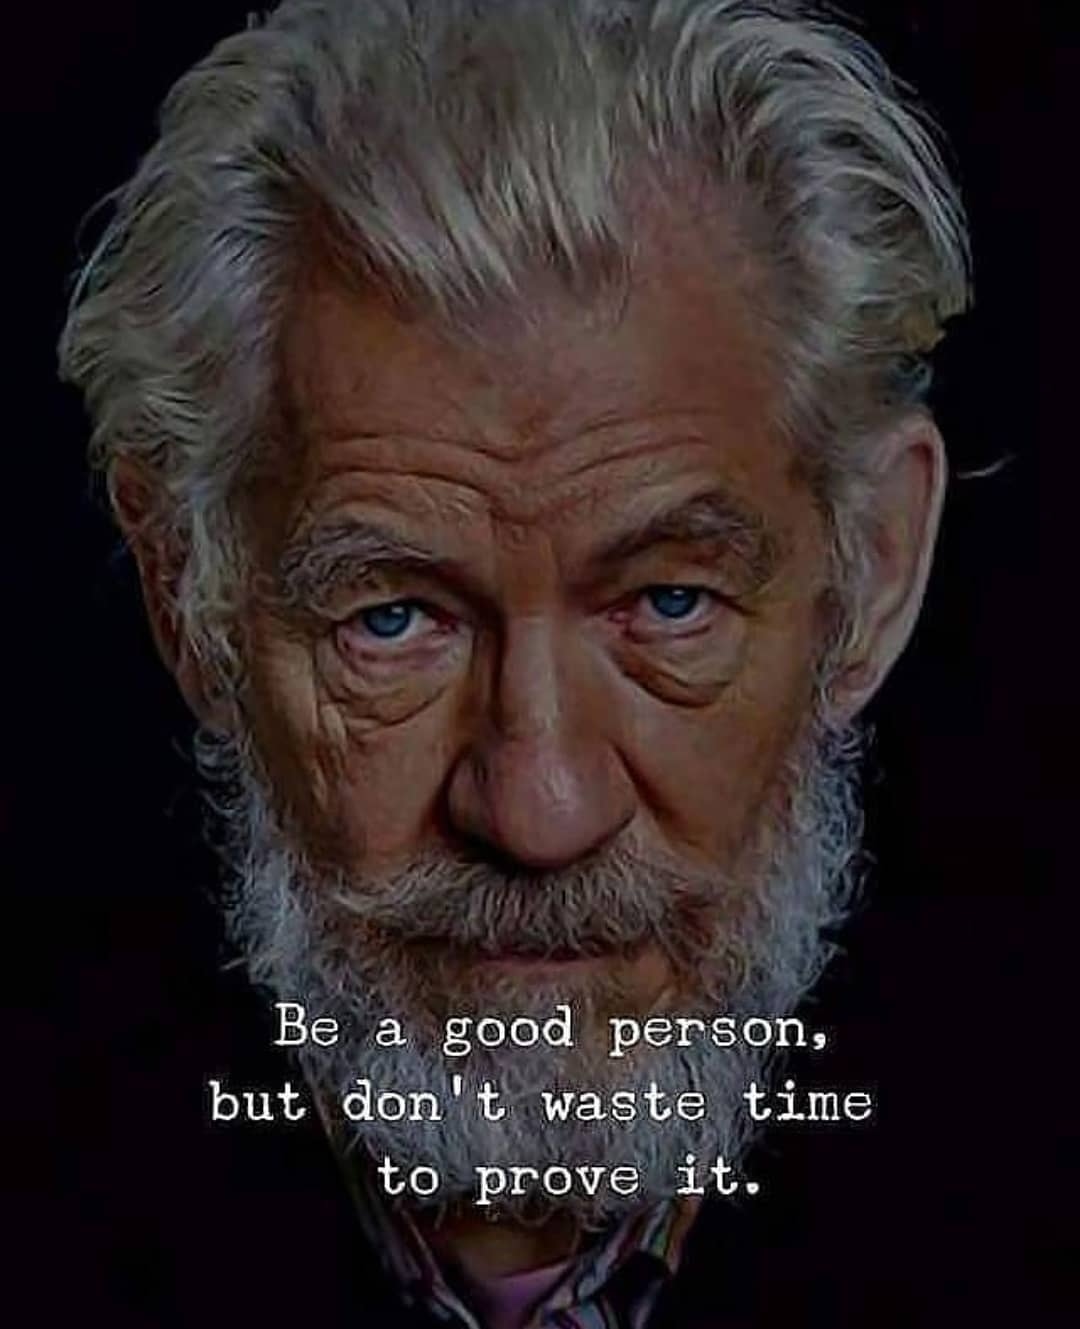 Be a good person, but don’t waste your time trying to prove it.